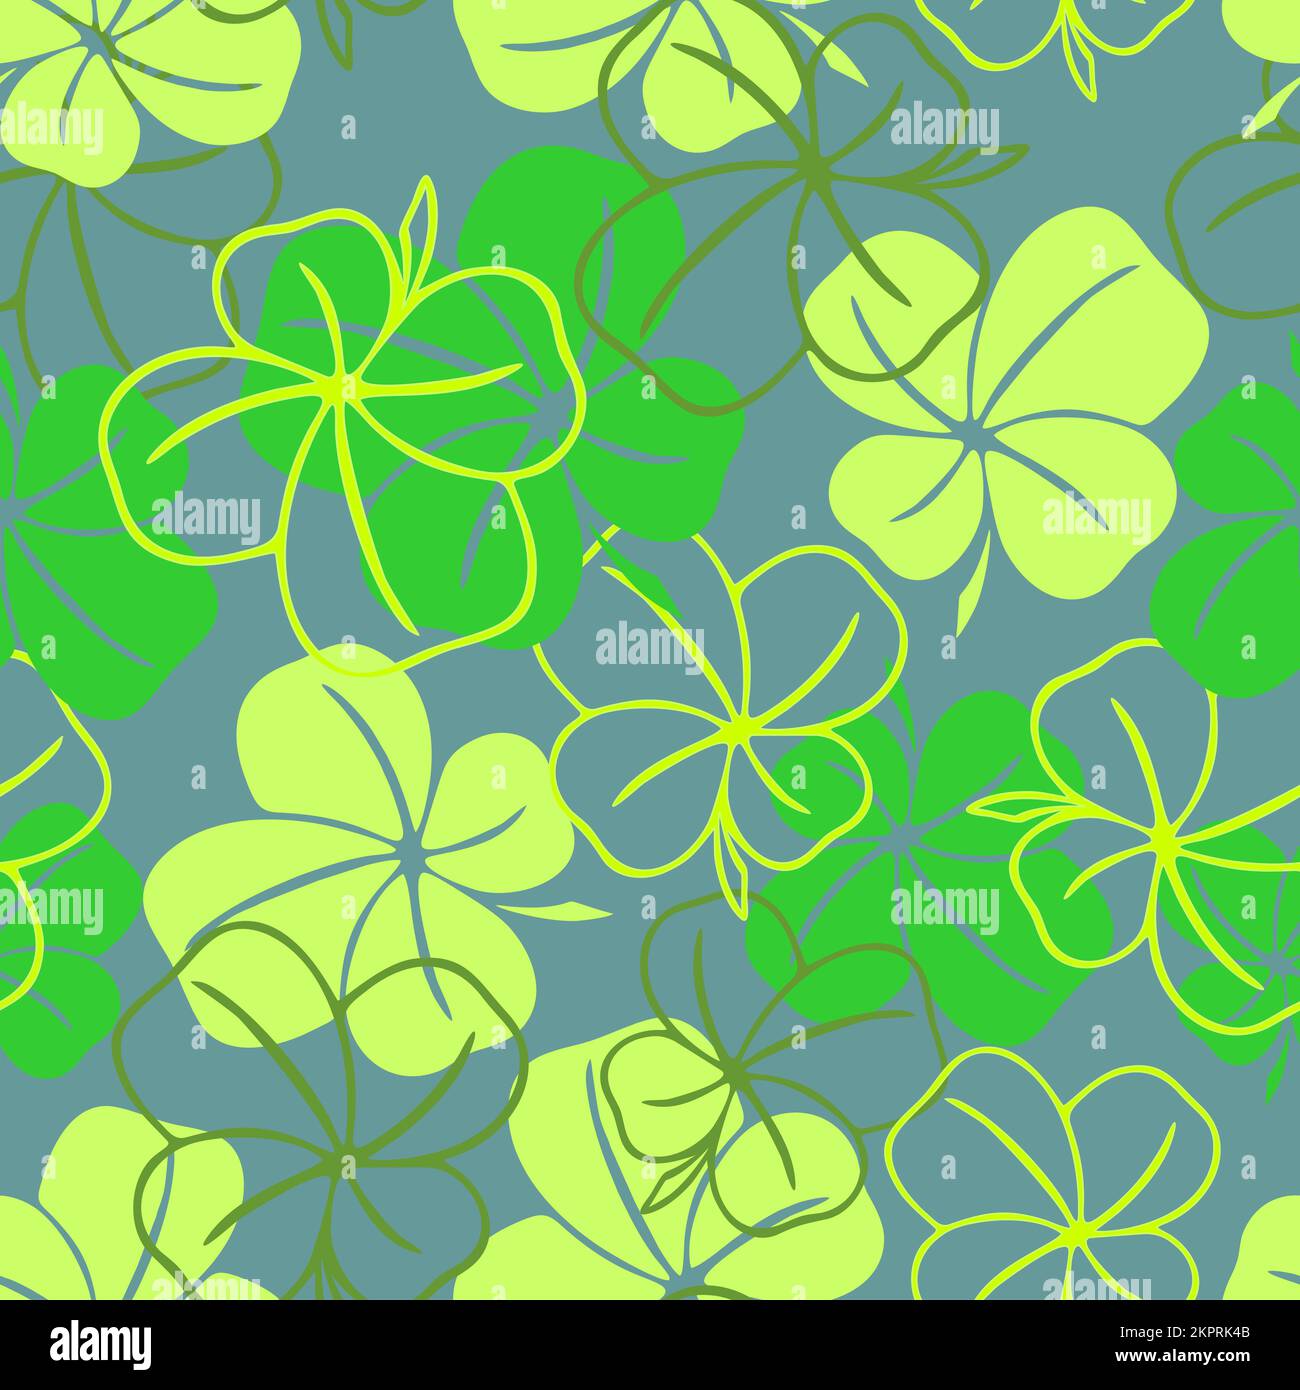 seamless pattern of green contours and silhouettes of a four-leaf clover on a blue background, texture design Stock Photo